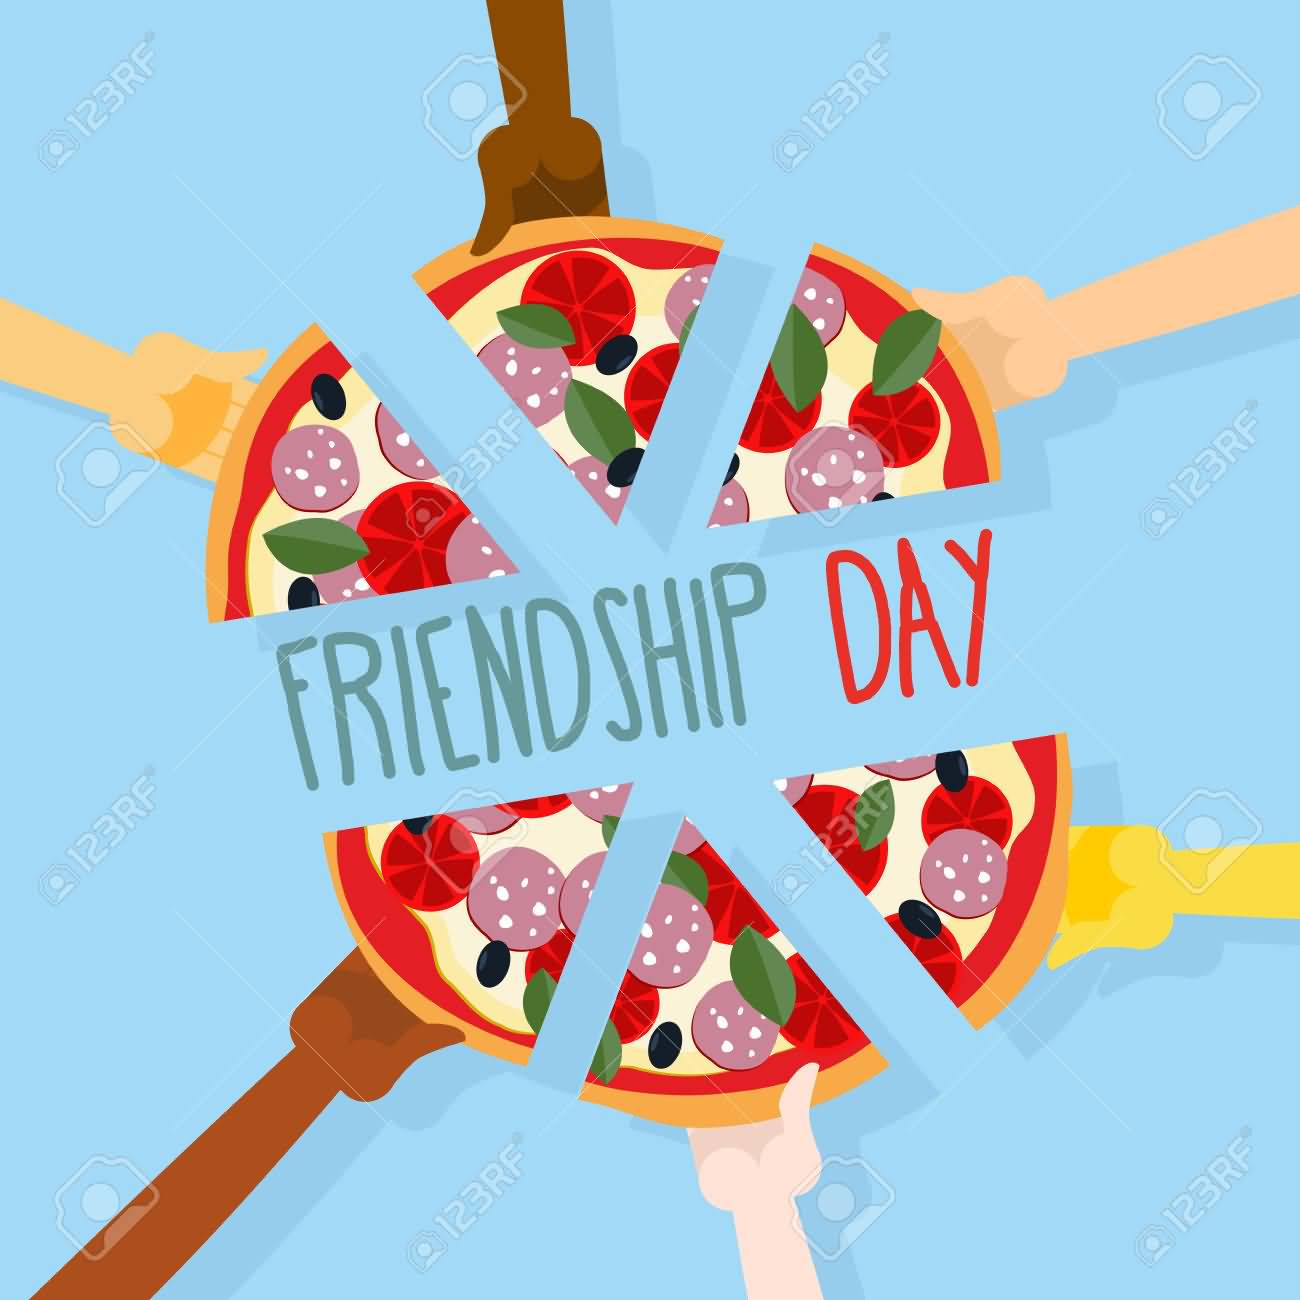 International Day of Friendship Pizza Slices For Friends Illustration